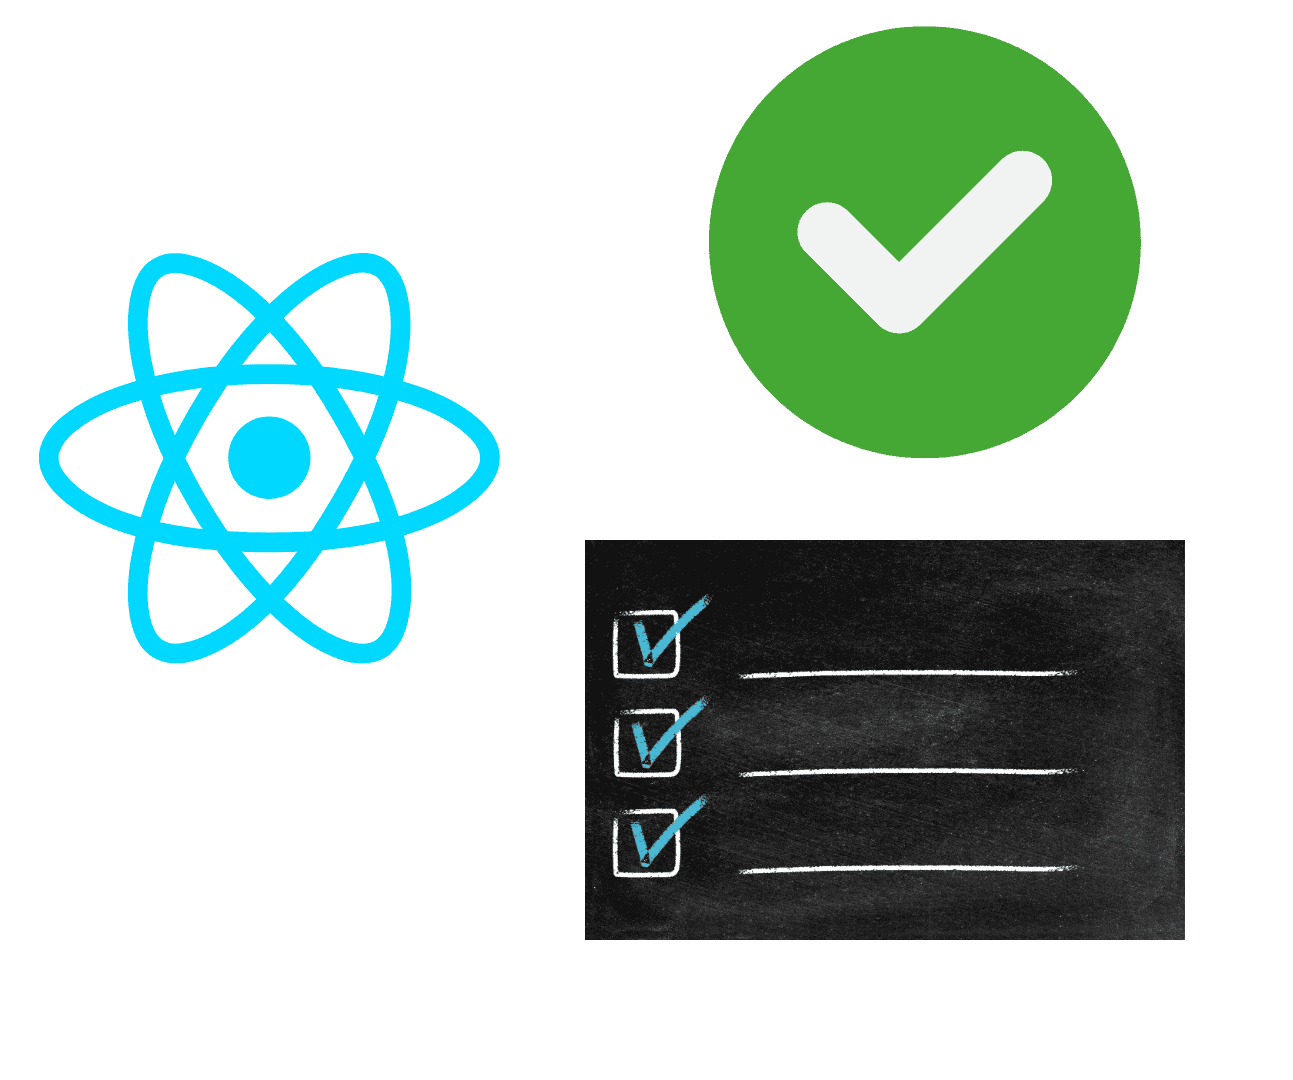 How to Select Single and Multiple Checkbox Values in React